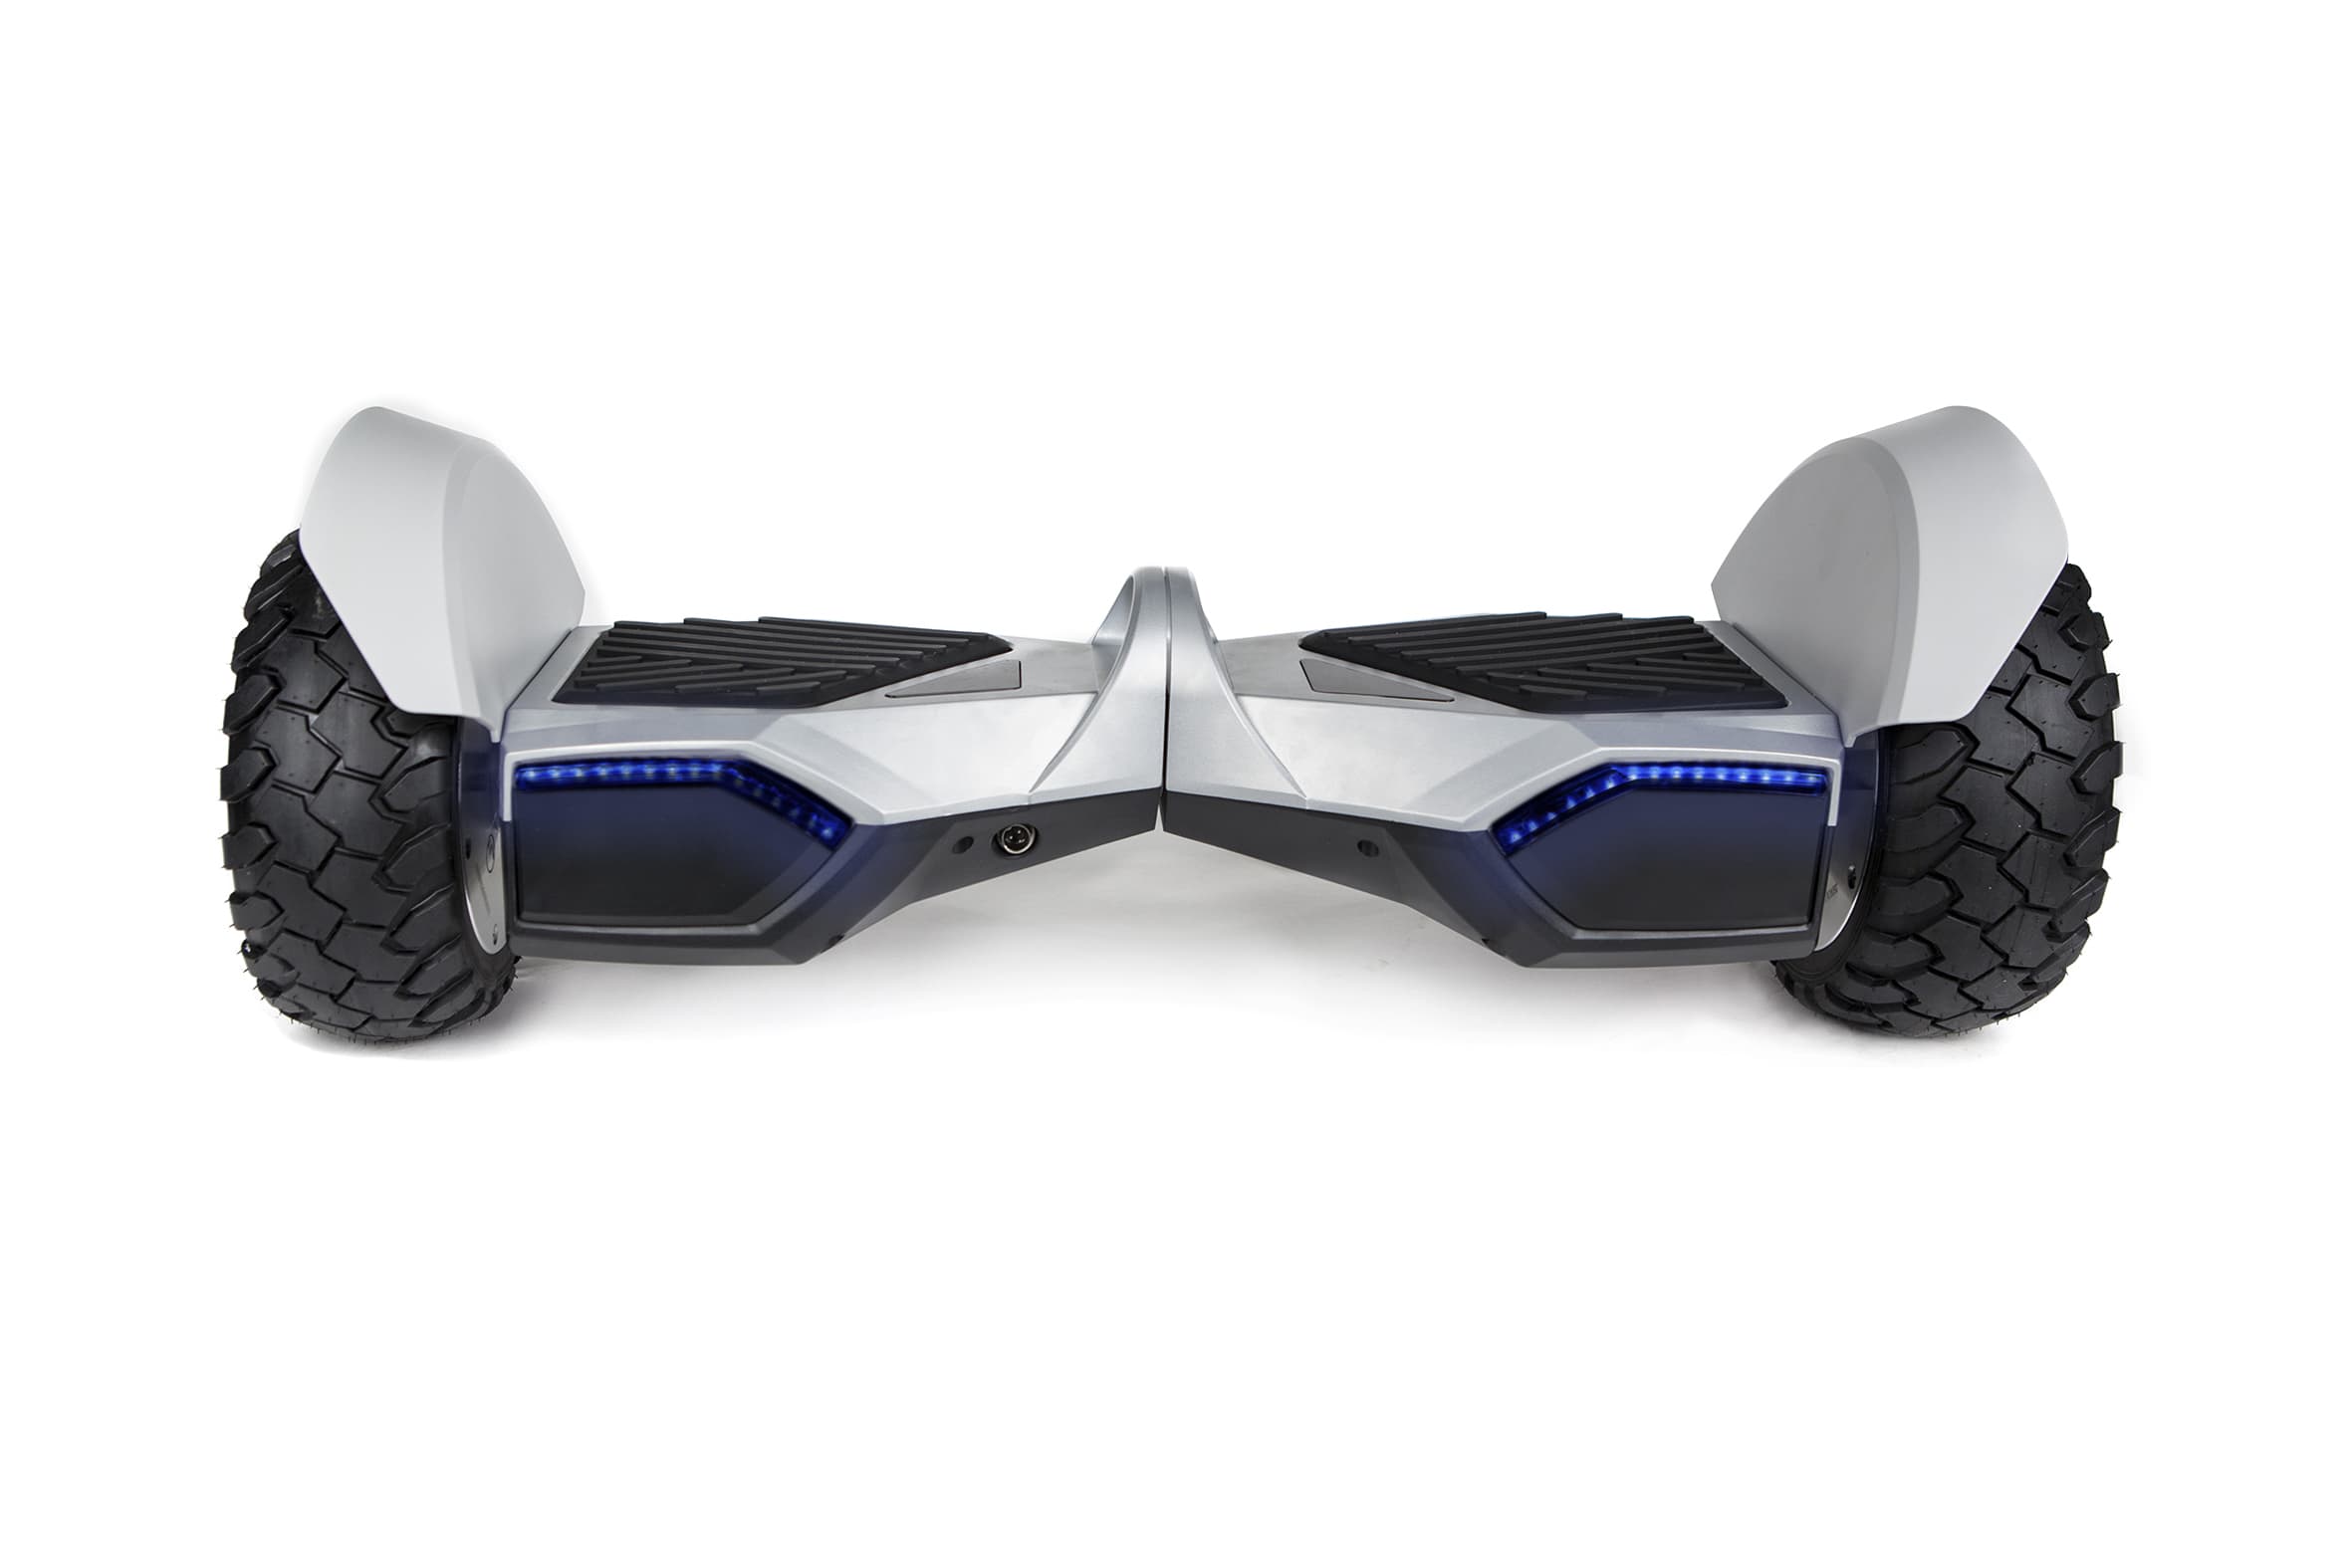 Hoverboard tout terrain blanc pas cher - Hoverboard Smart